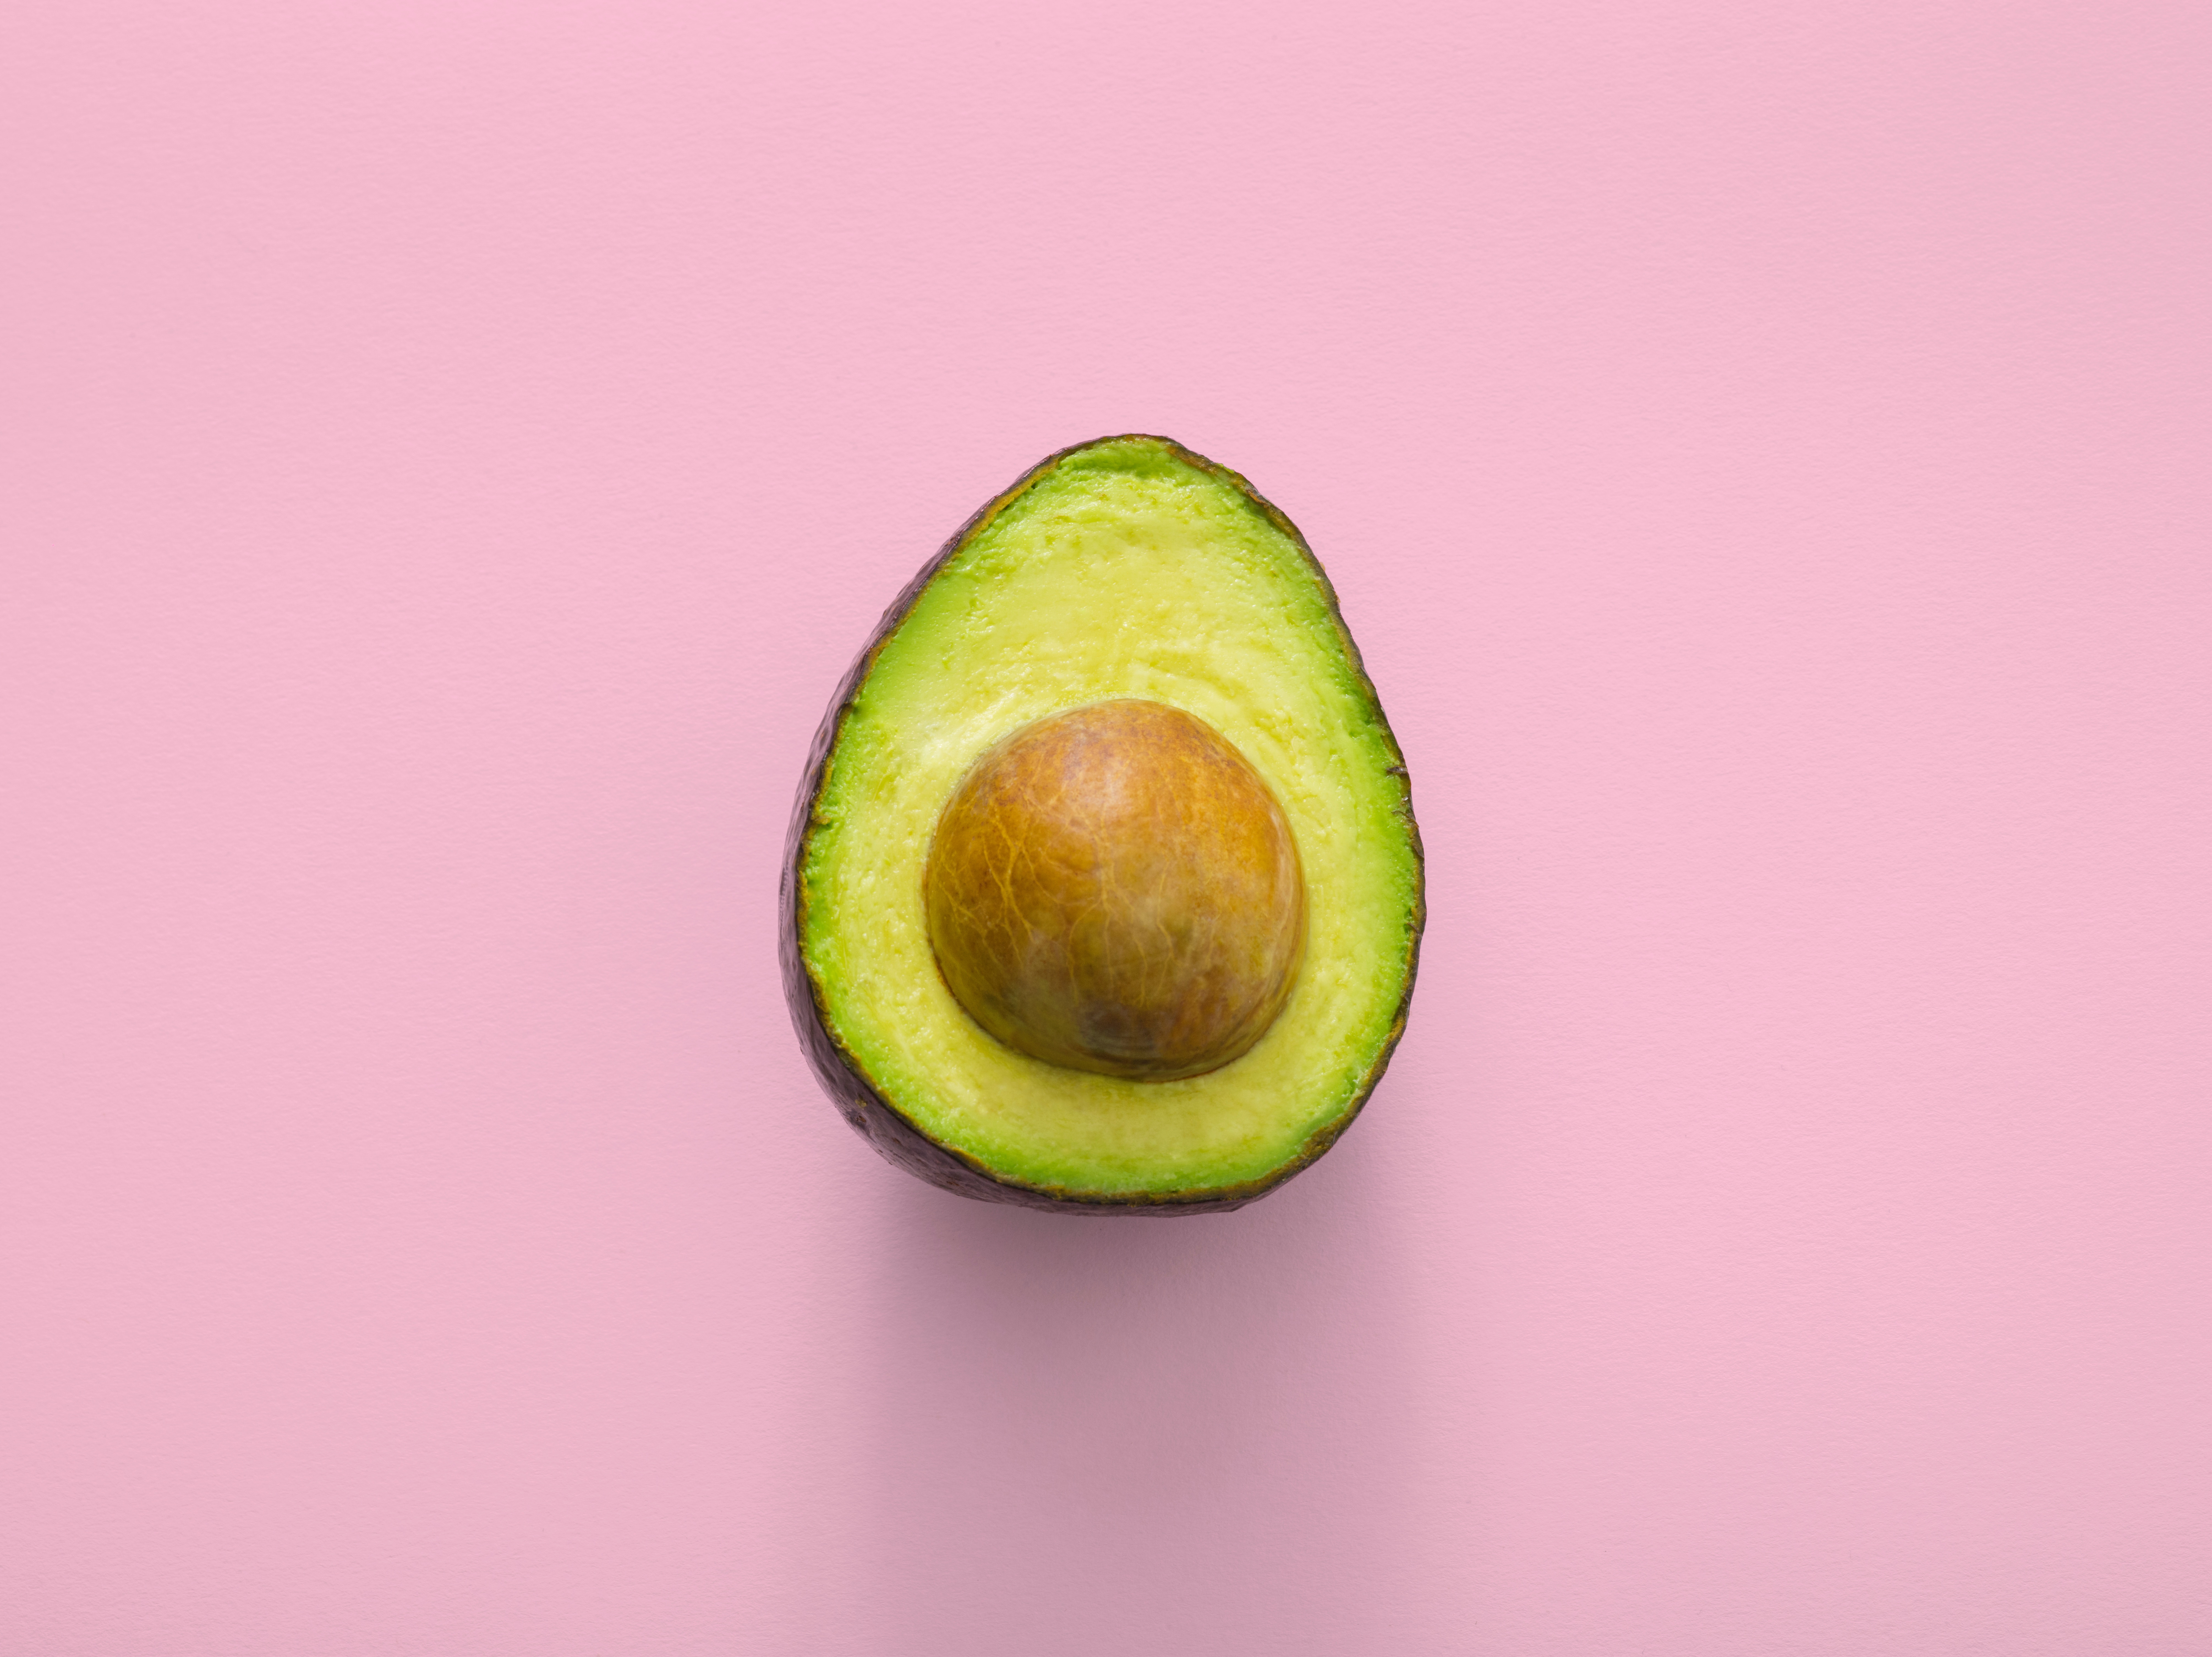 10 Avocado snacks that will get you drooling